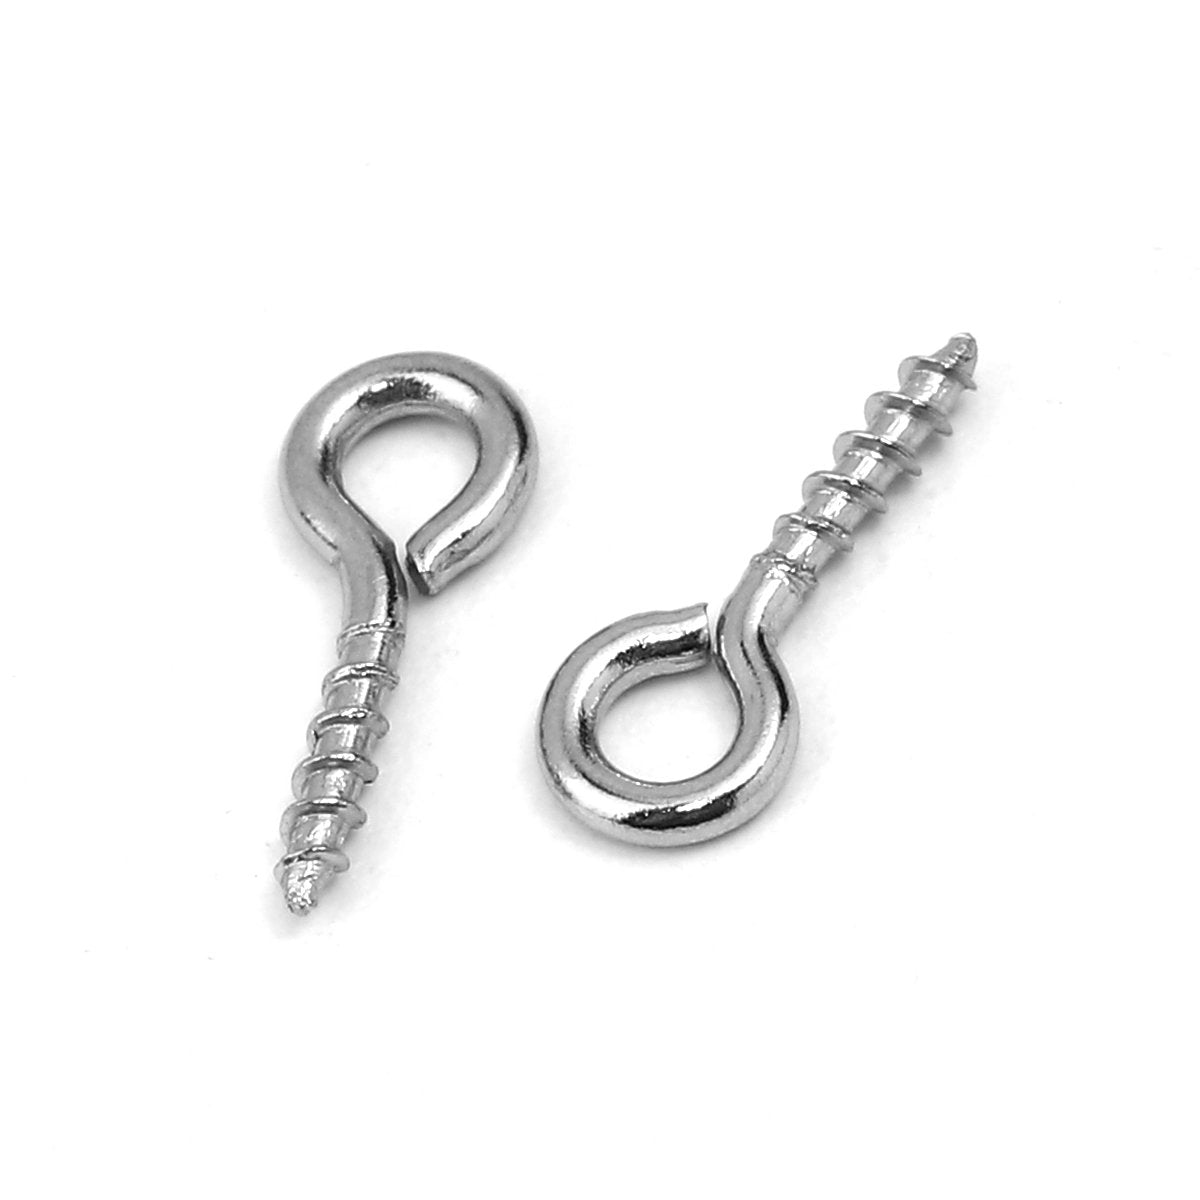 Silver Screw Eyes Bails - 10pcs Stainless Steel Bails Top Drilled - Four sizes available